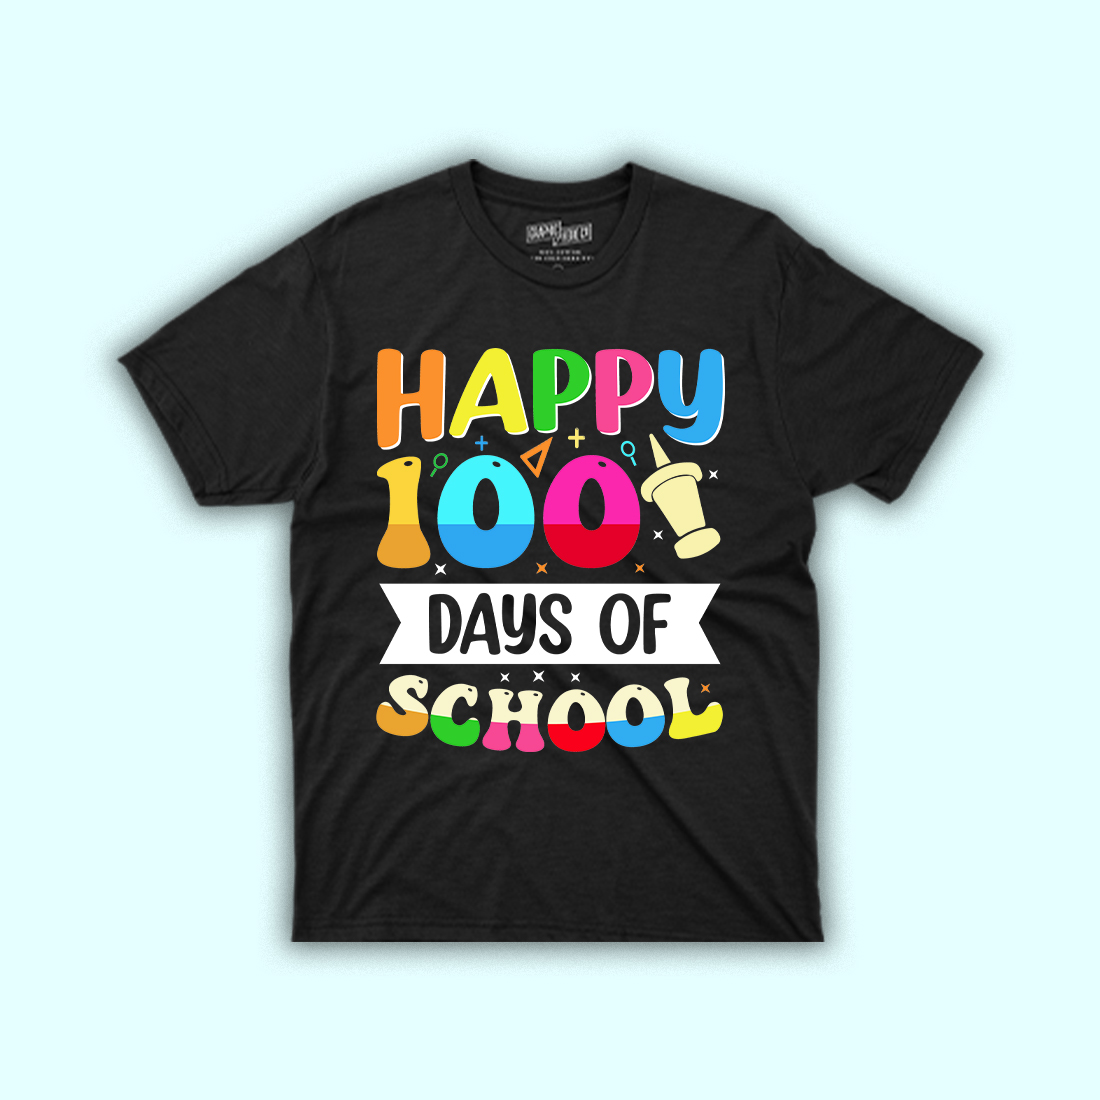 Image of t-shirt with amazing inscription Welcome 100 Days Of School